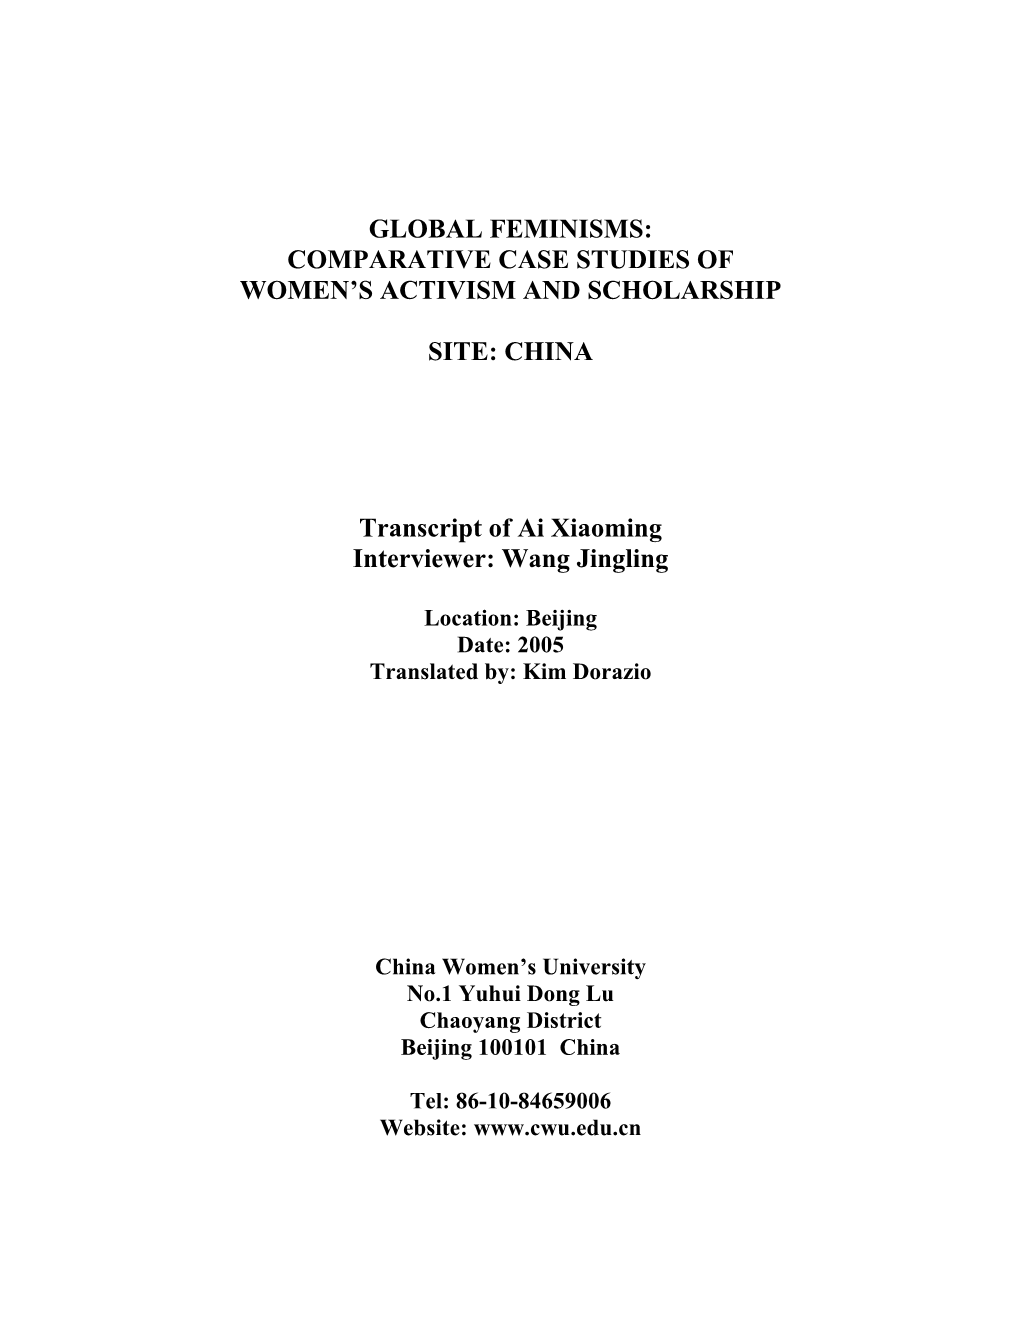 CHINA Transcript of Ai Xiaoming Interview